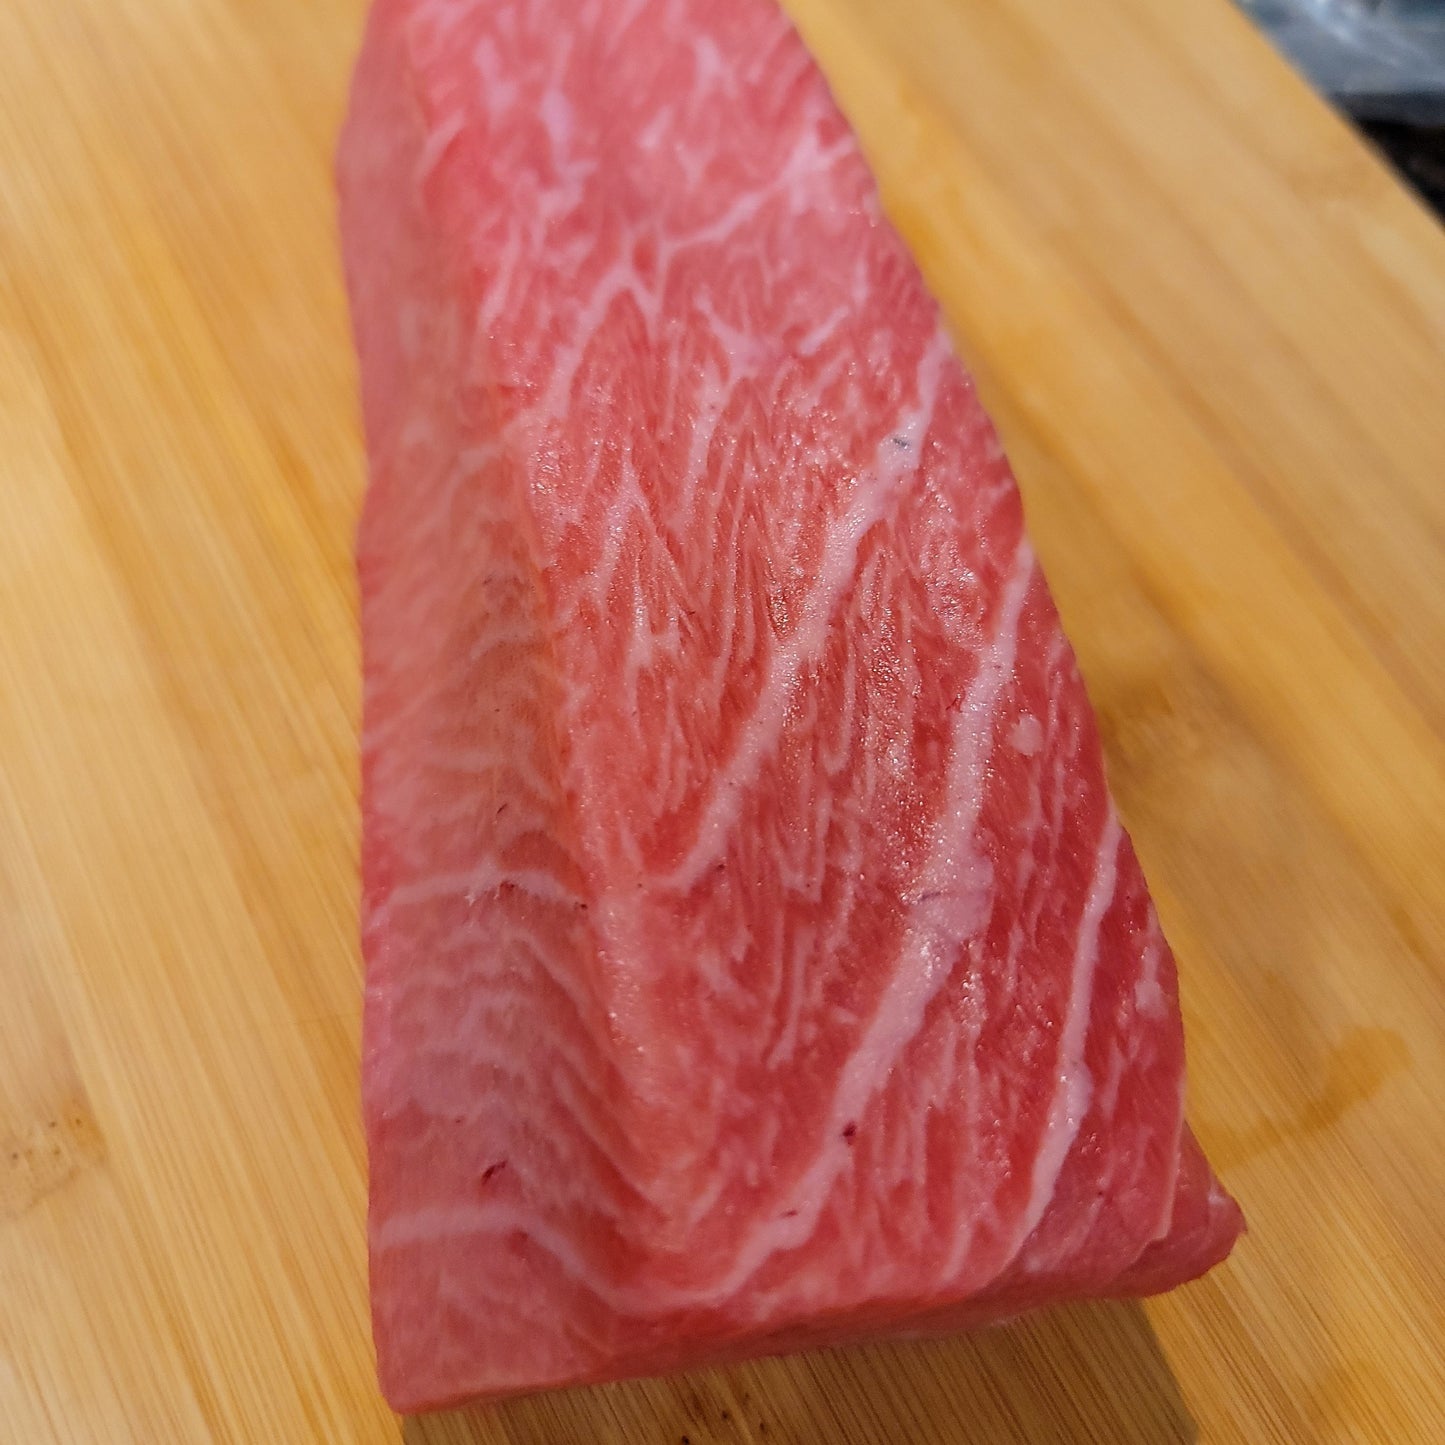 Wild Bluefin Tuna 野生藍鰭金槍魚 (Please contact us for pre ordering)